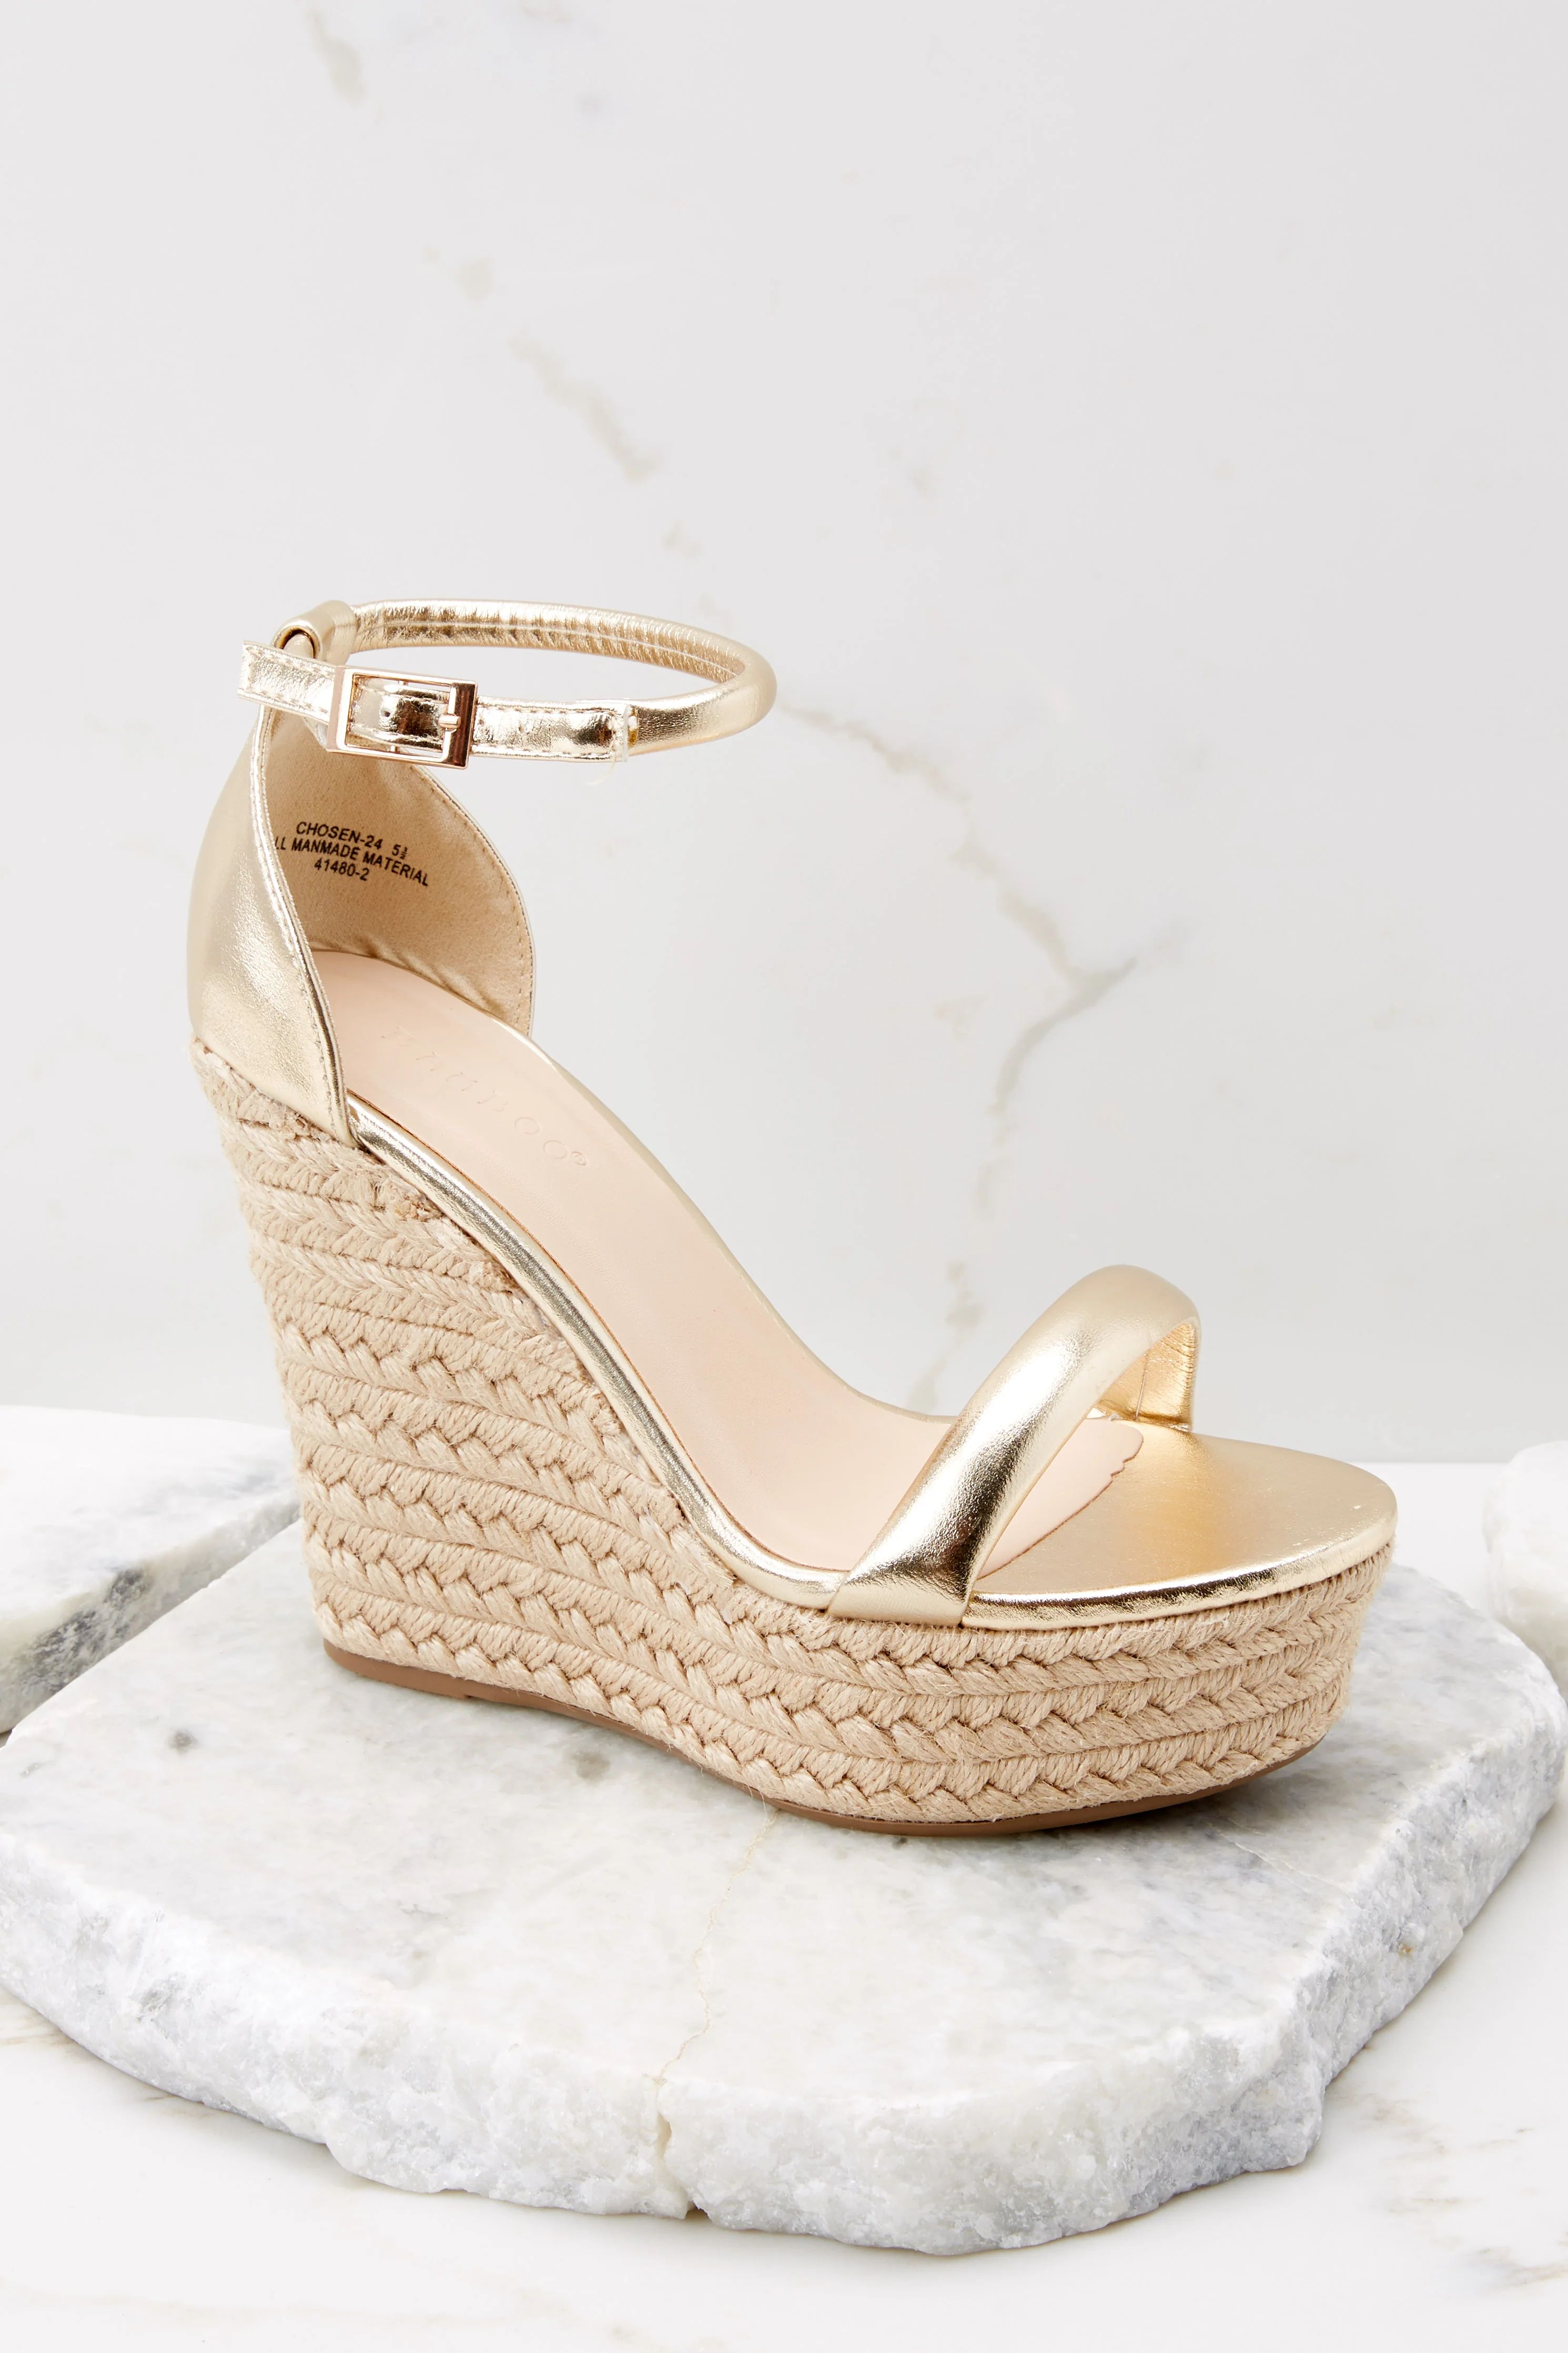 Evening Essential Gold Wedge Sandals | Red Dress 